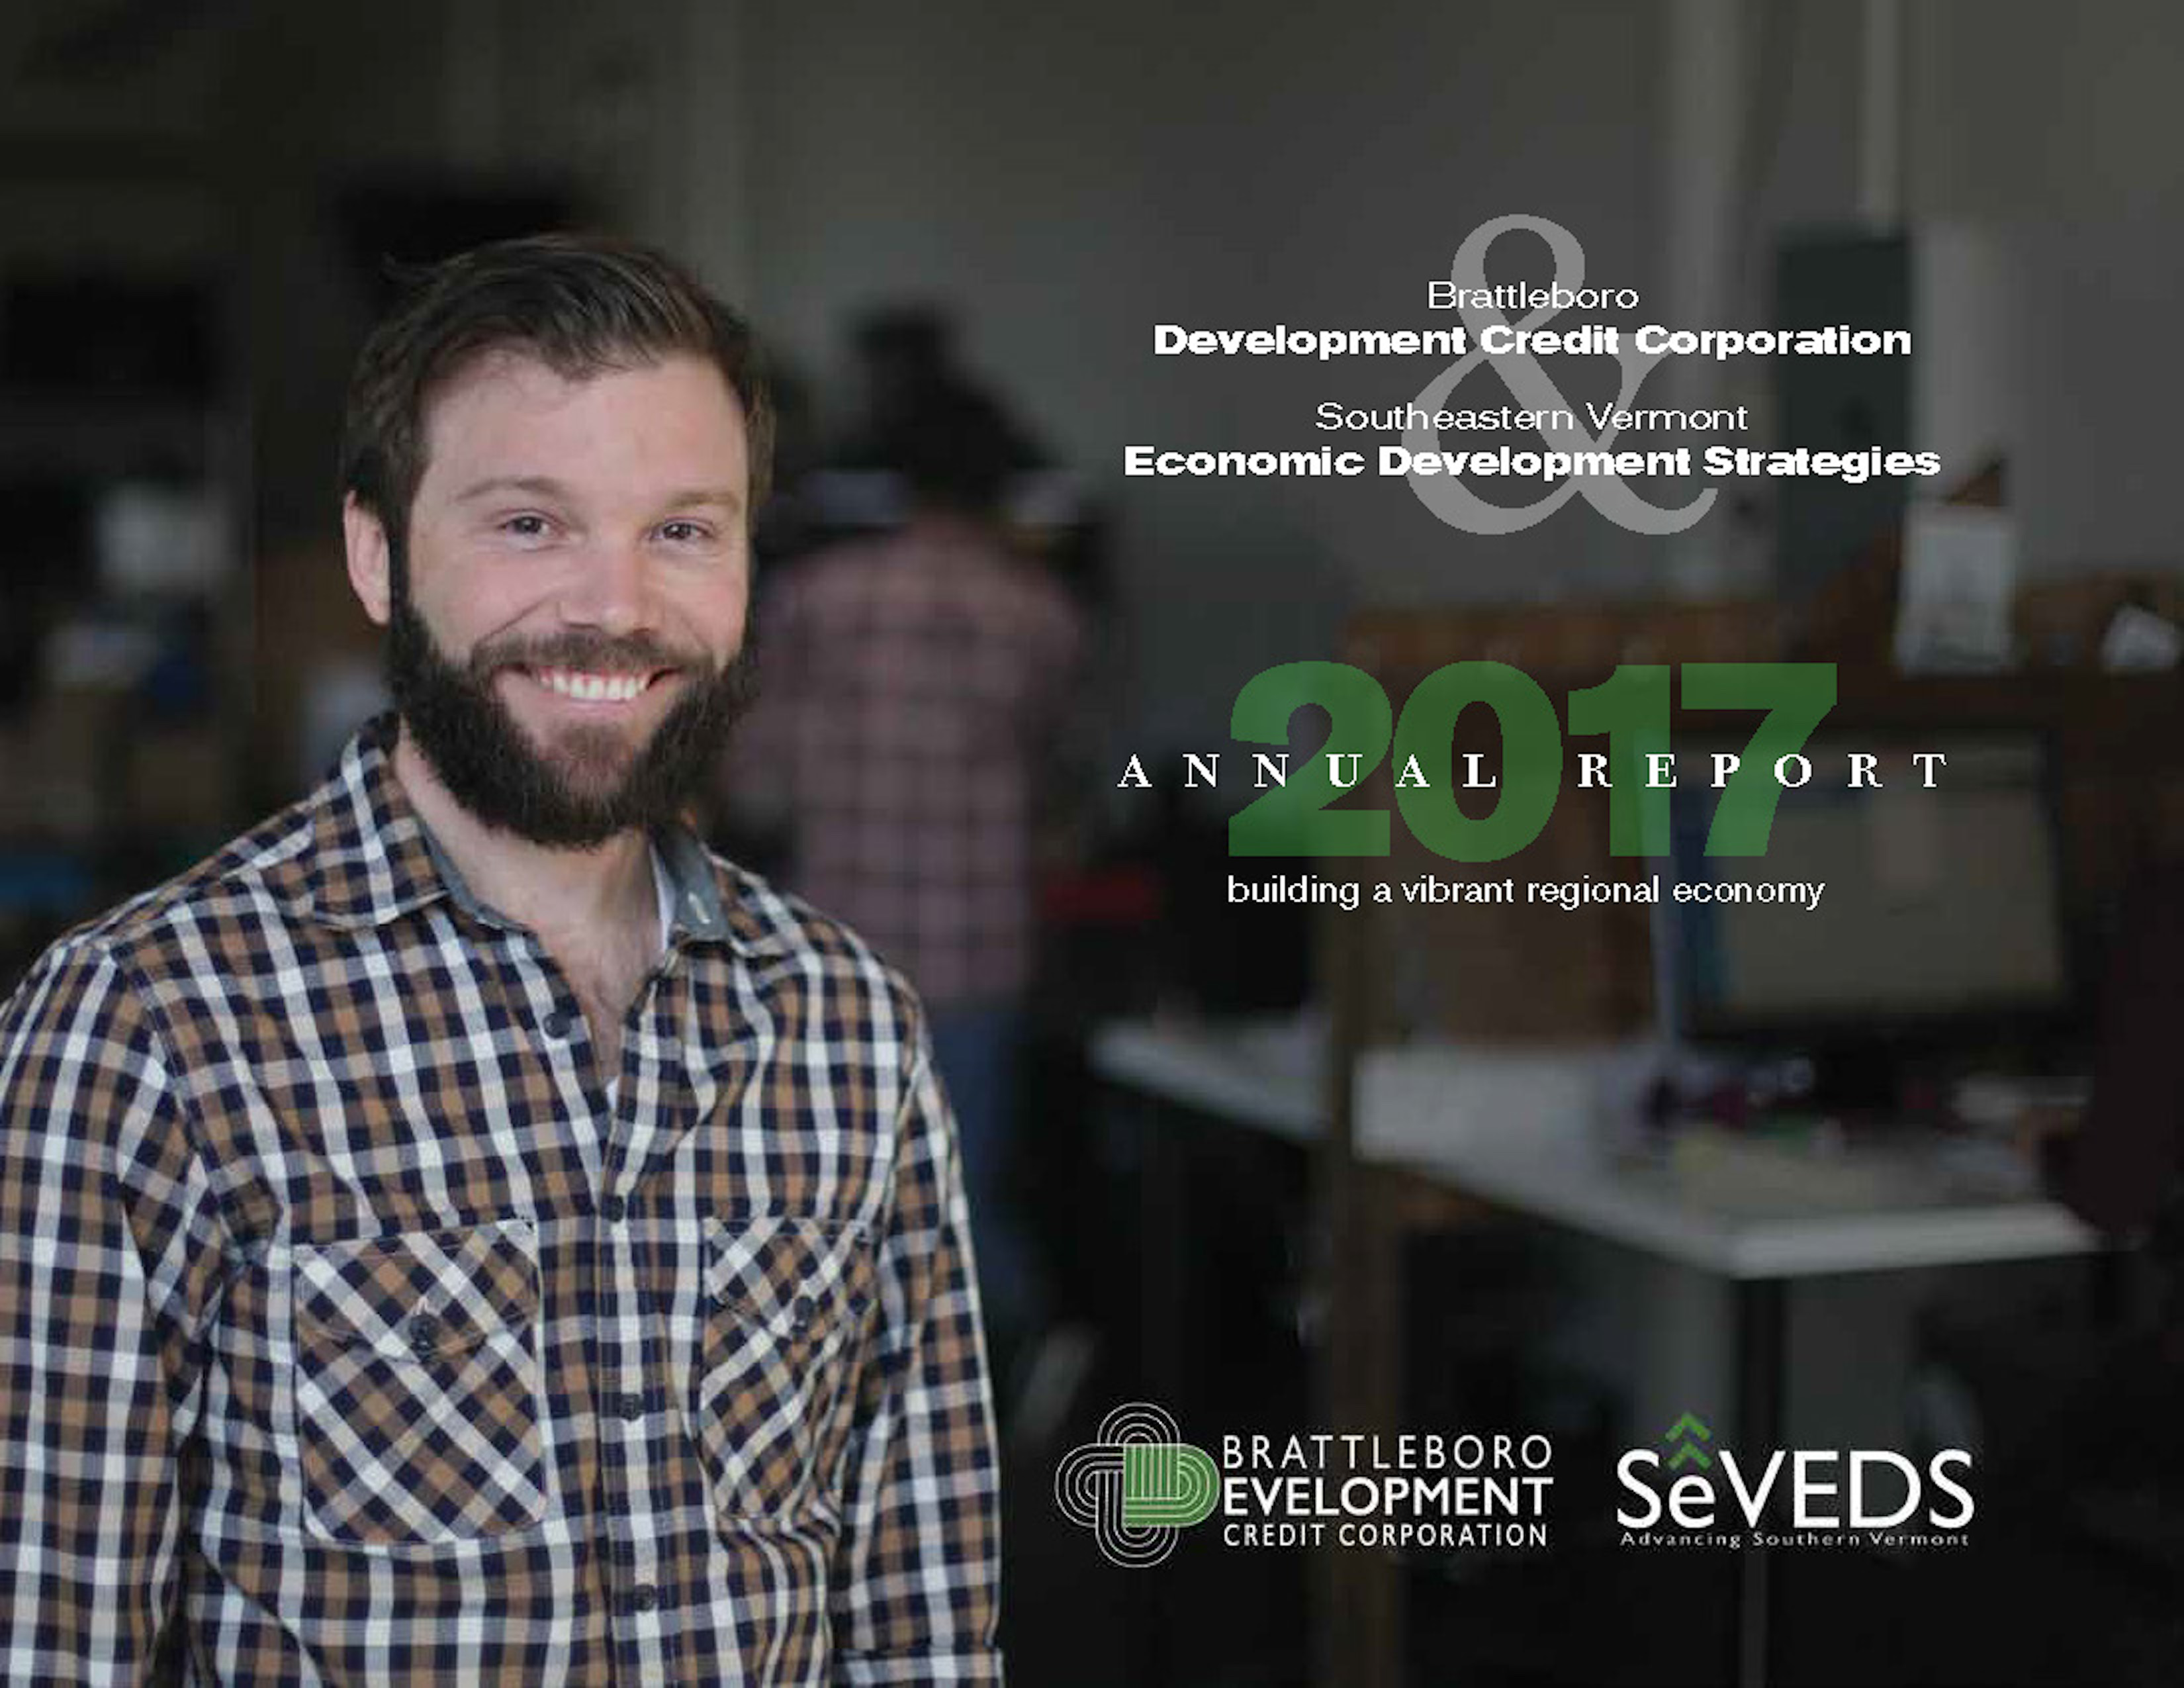 2017 Annual Report For BDCC & SeVEDS Highlights Partnerships